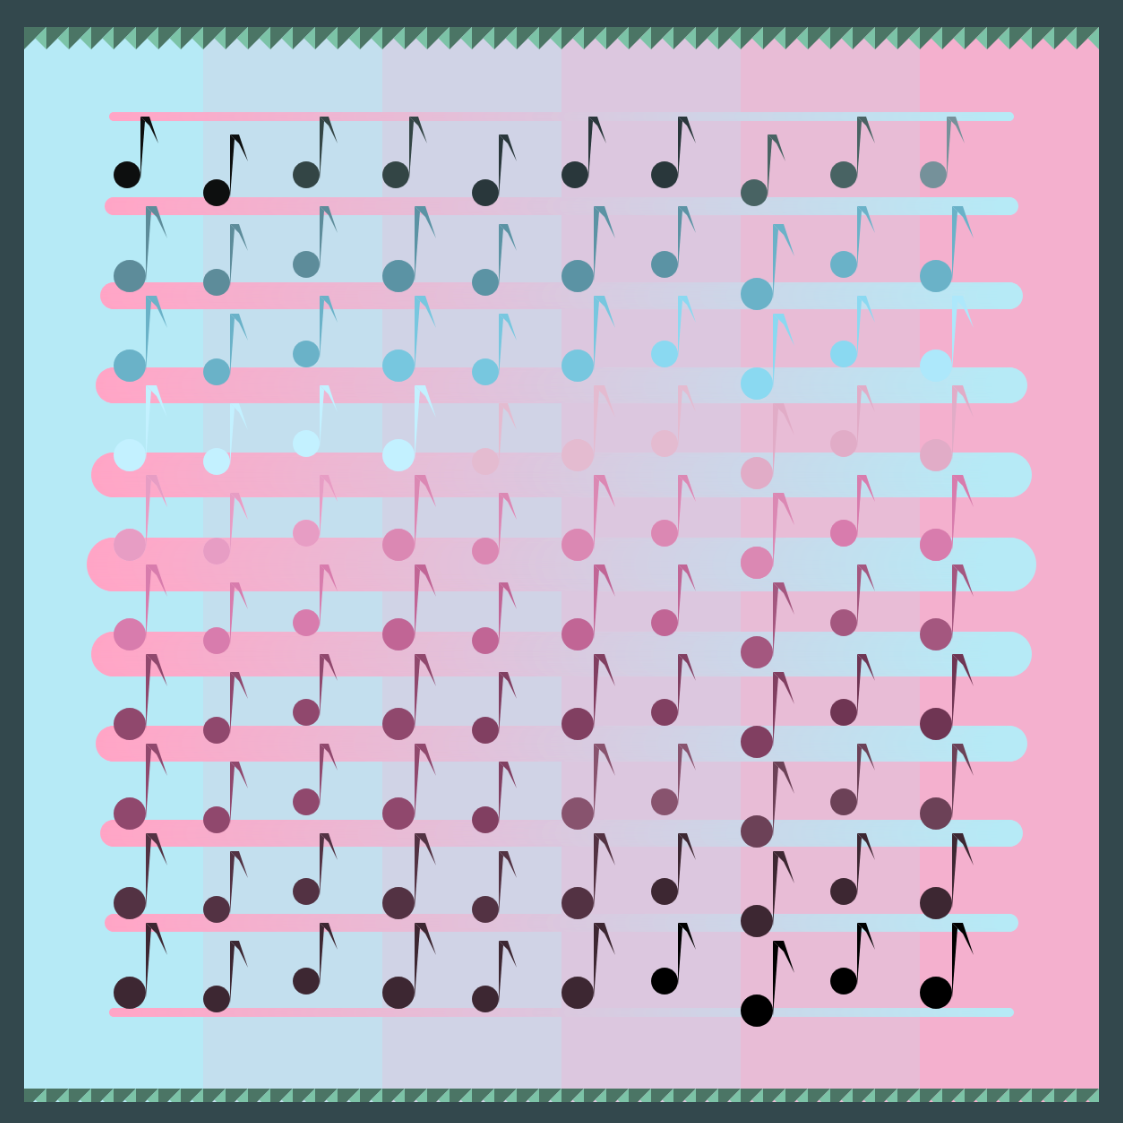 Lines of gradient black, blue, and pink music notes on a gradient pink and blue background.